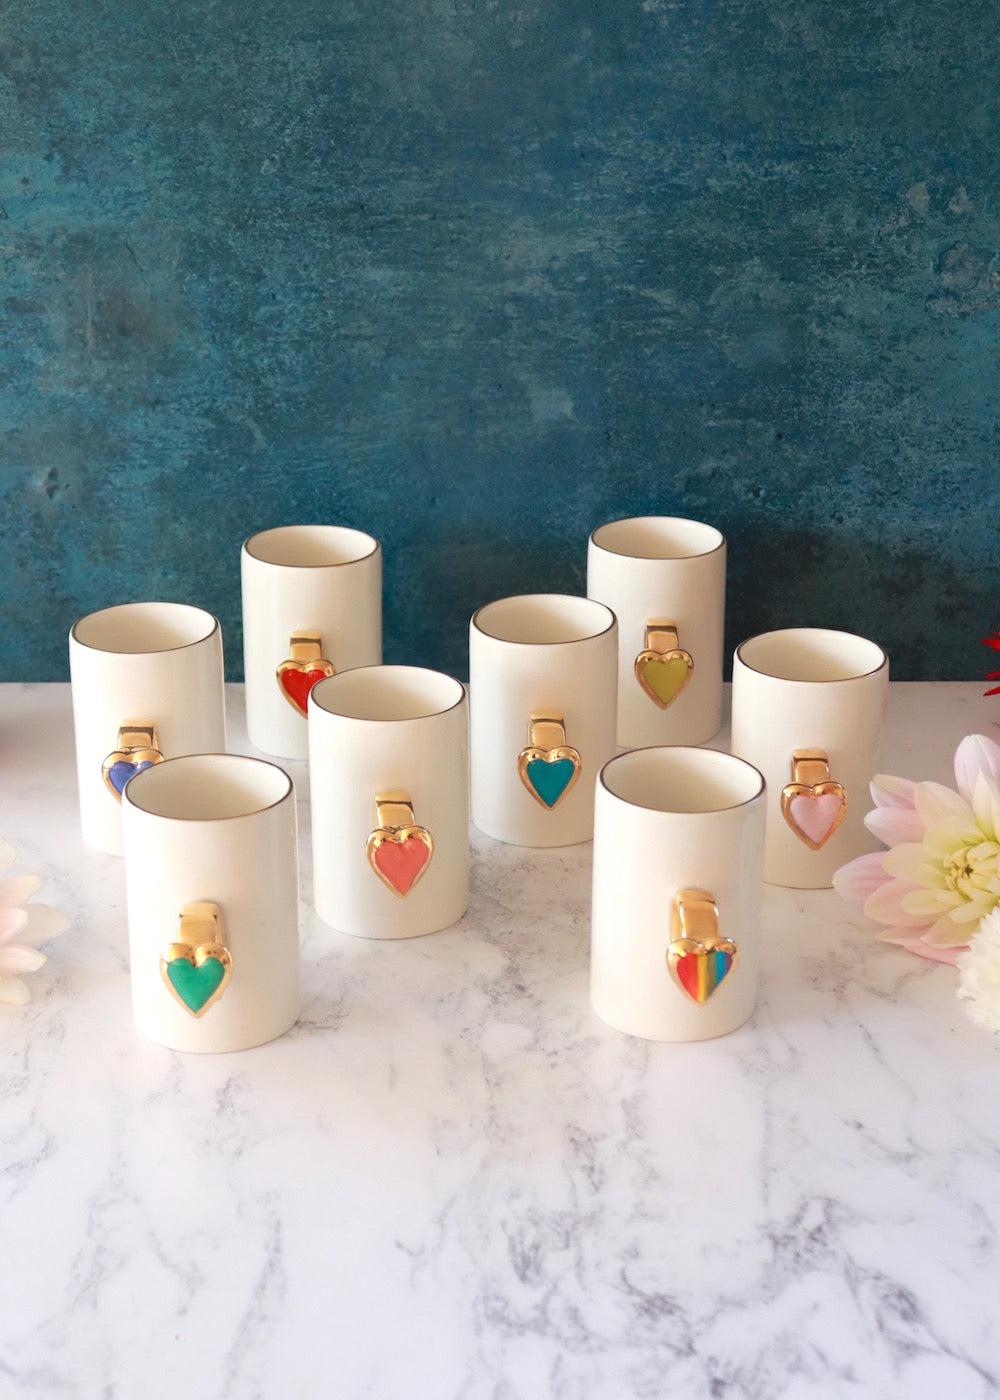 Love Mugs - Hearts Collection